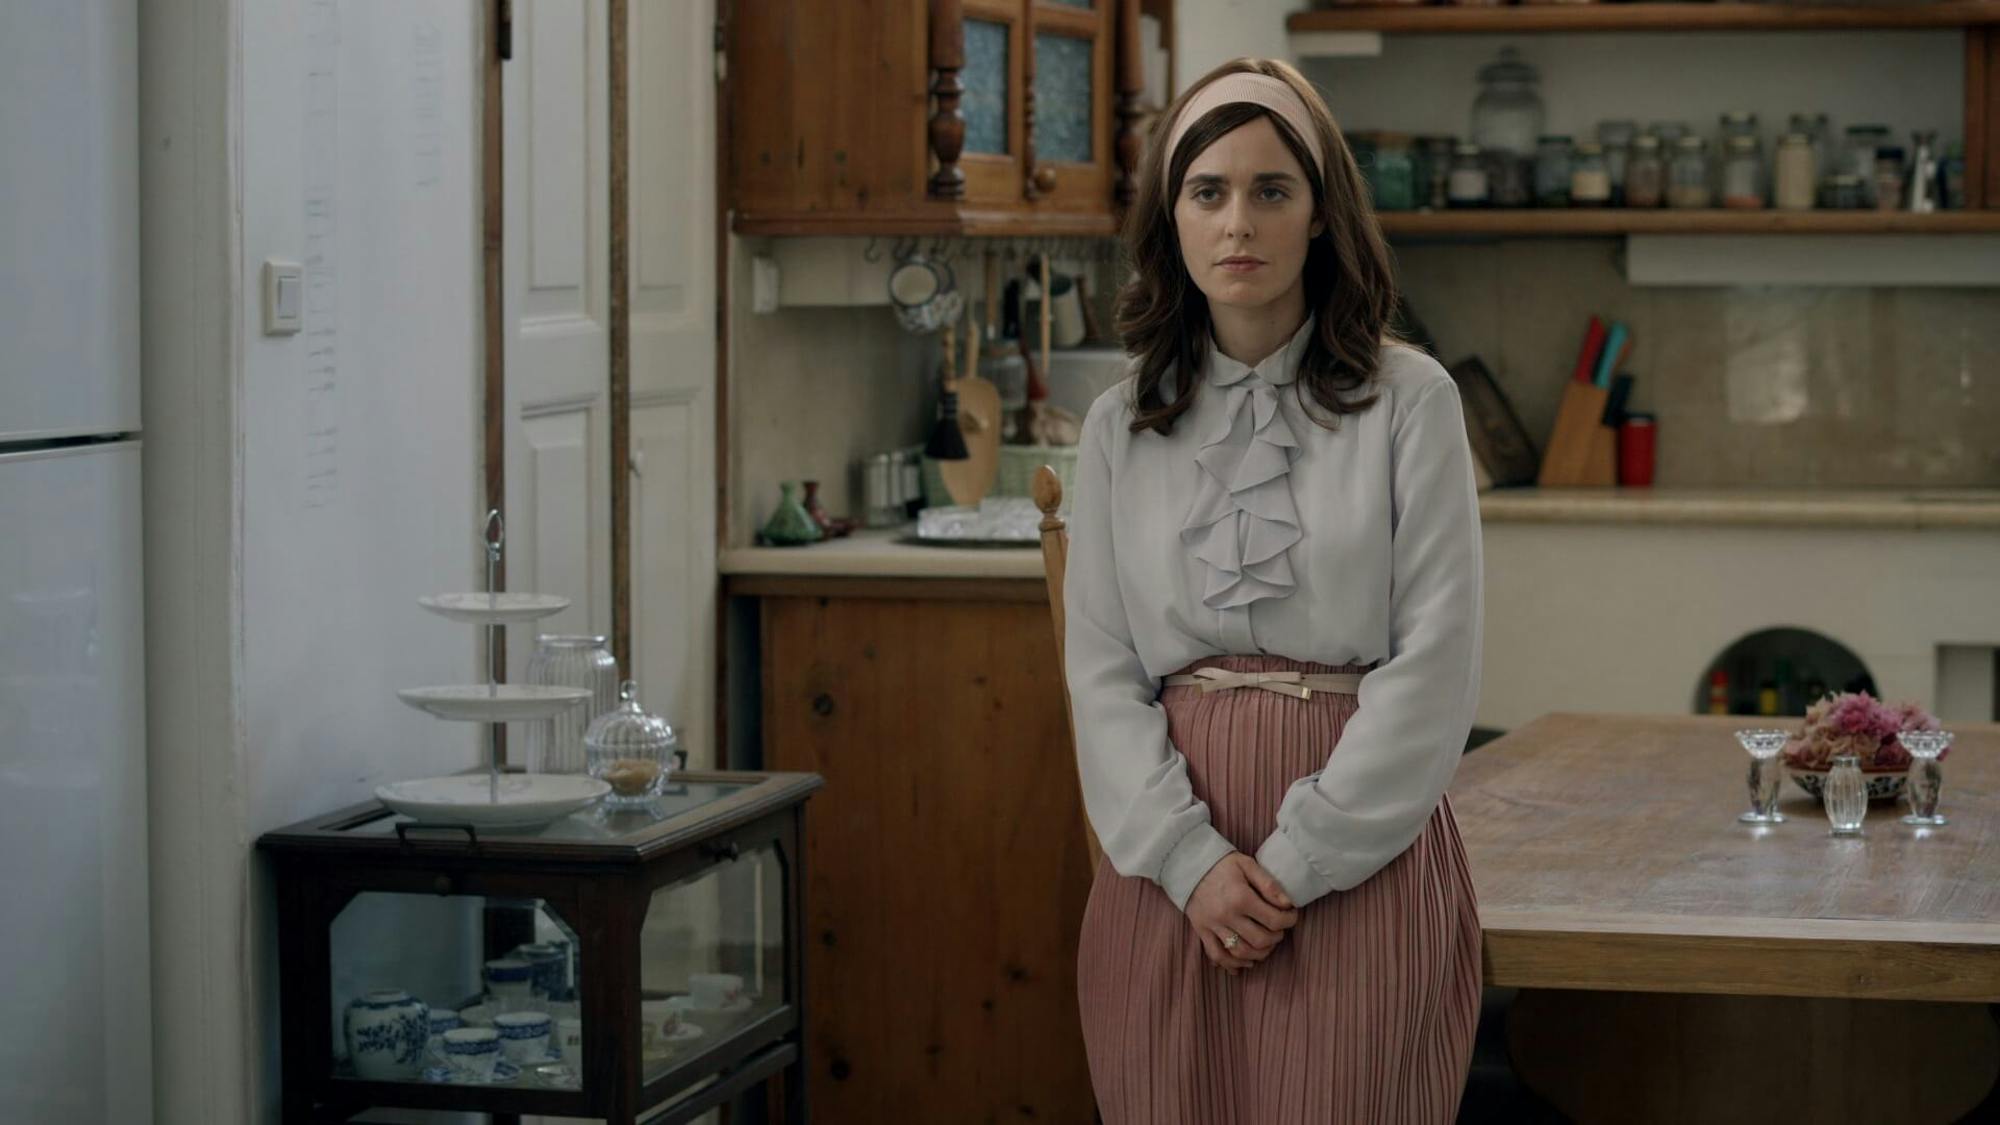 Libbi Shtisel (Hadas Yaron) stands in a kitchen looking prim and proper. She wears a pink skirt, pink headband, blue blouse, and small white belt. She crosses her arms in front of her body. In the background is a pristine kitchen.